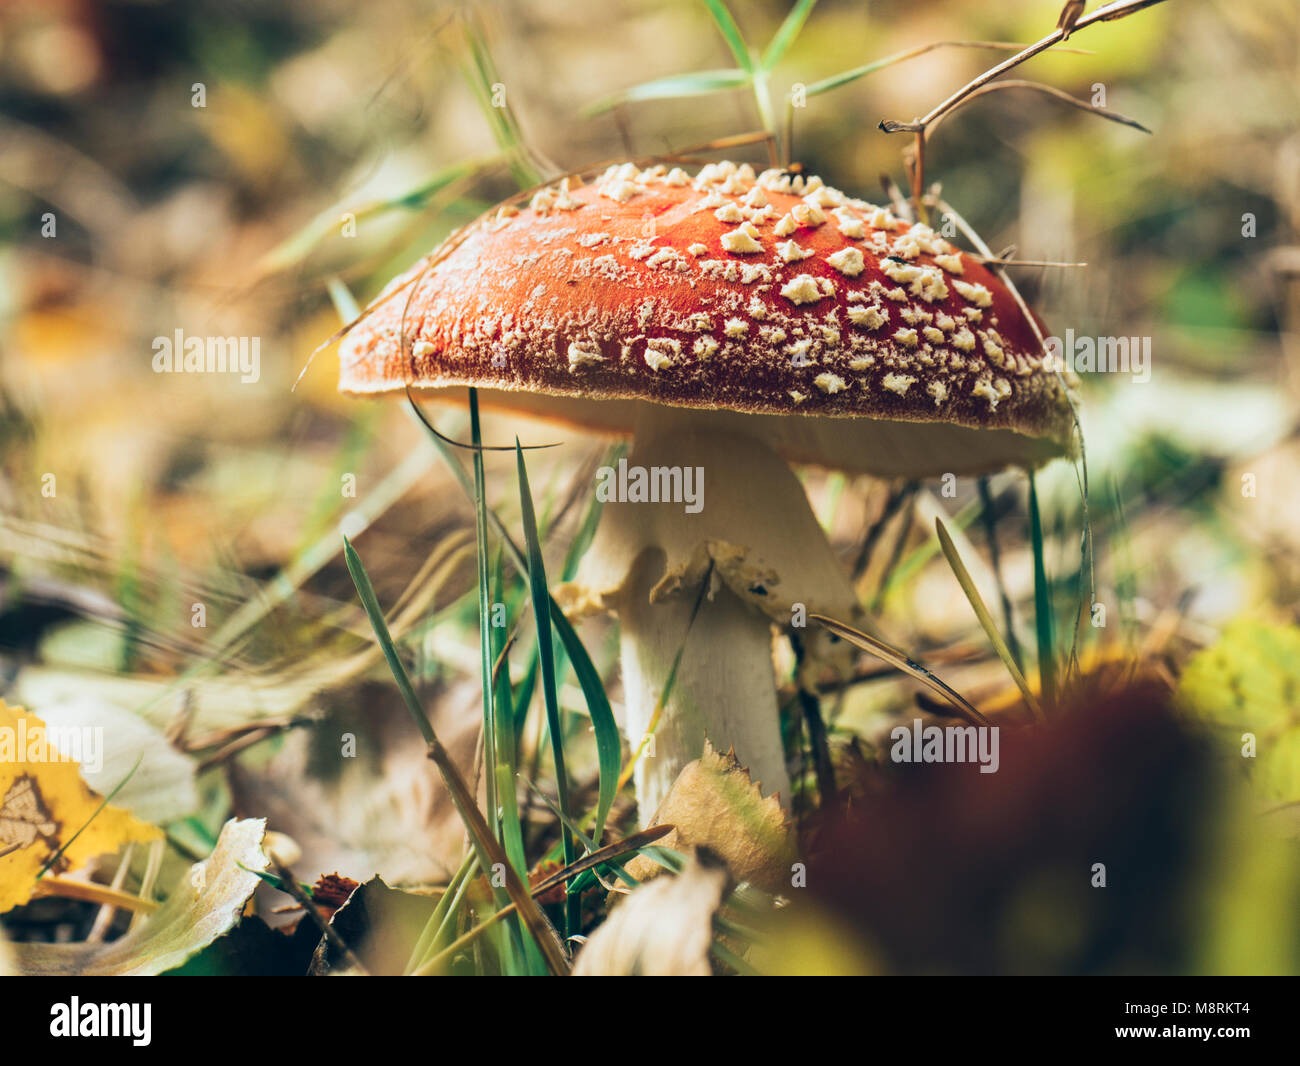 Amanita muscaria, poisonous mushroom in the grass Stock Photo